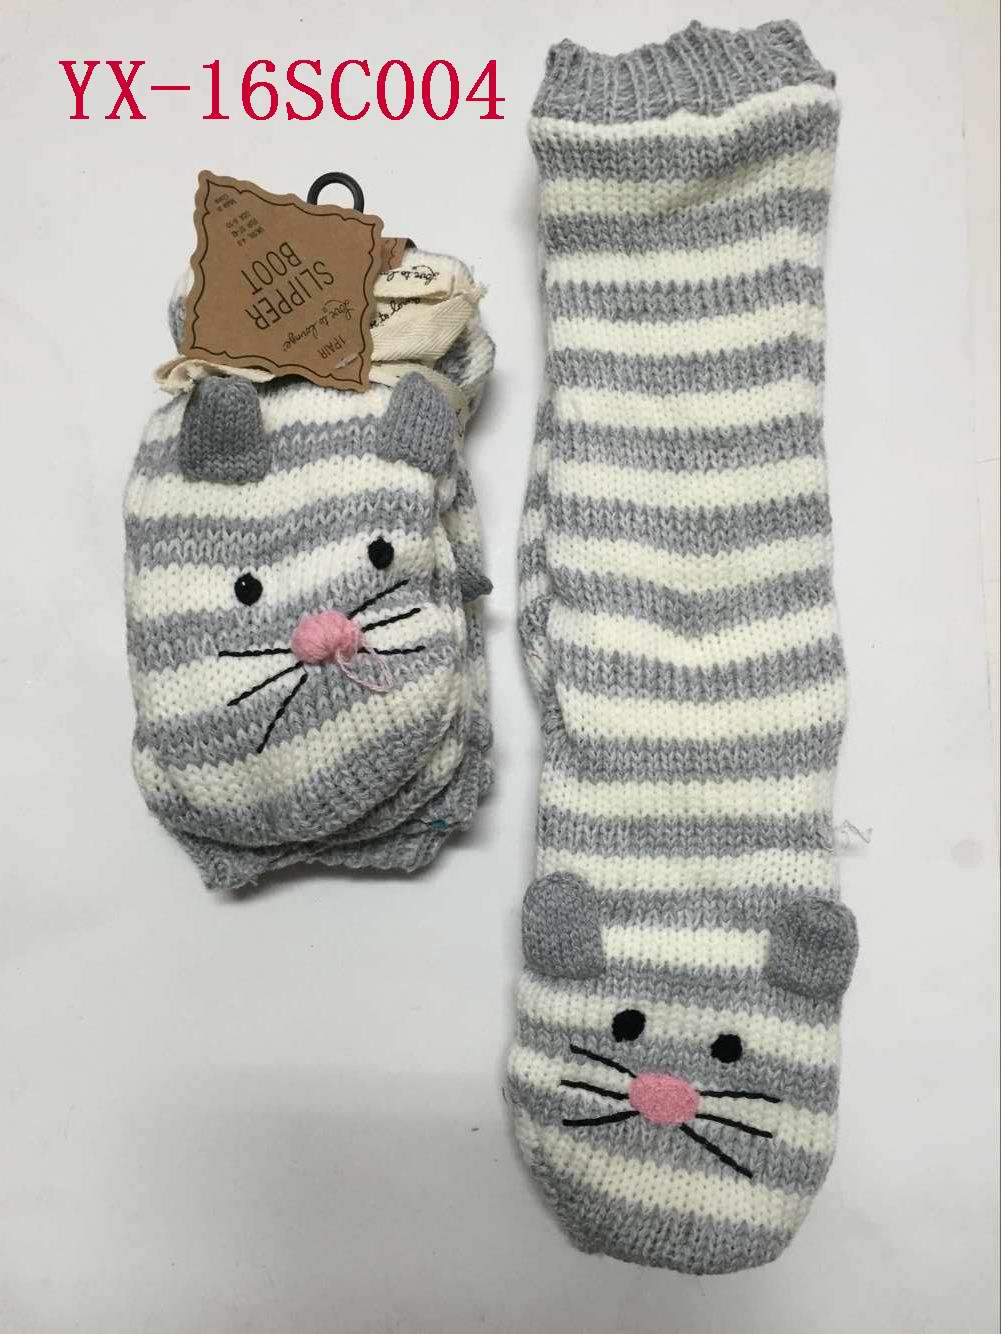 <img src='../manage/Upload/Pic/201612514848593.jpg' width='400' style='border:3px solid #EEEEEE;'><div align=center>Name:HOME SOCKS,No.:6010393,Price:0 元</div>